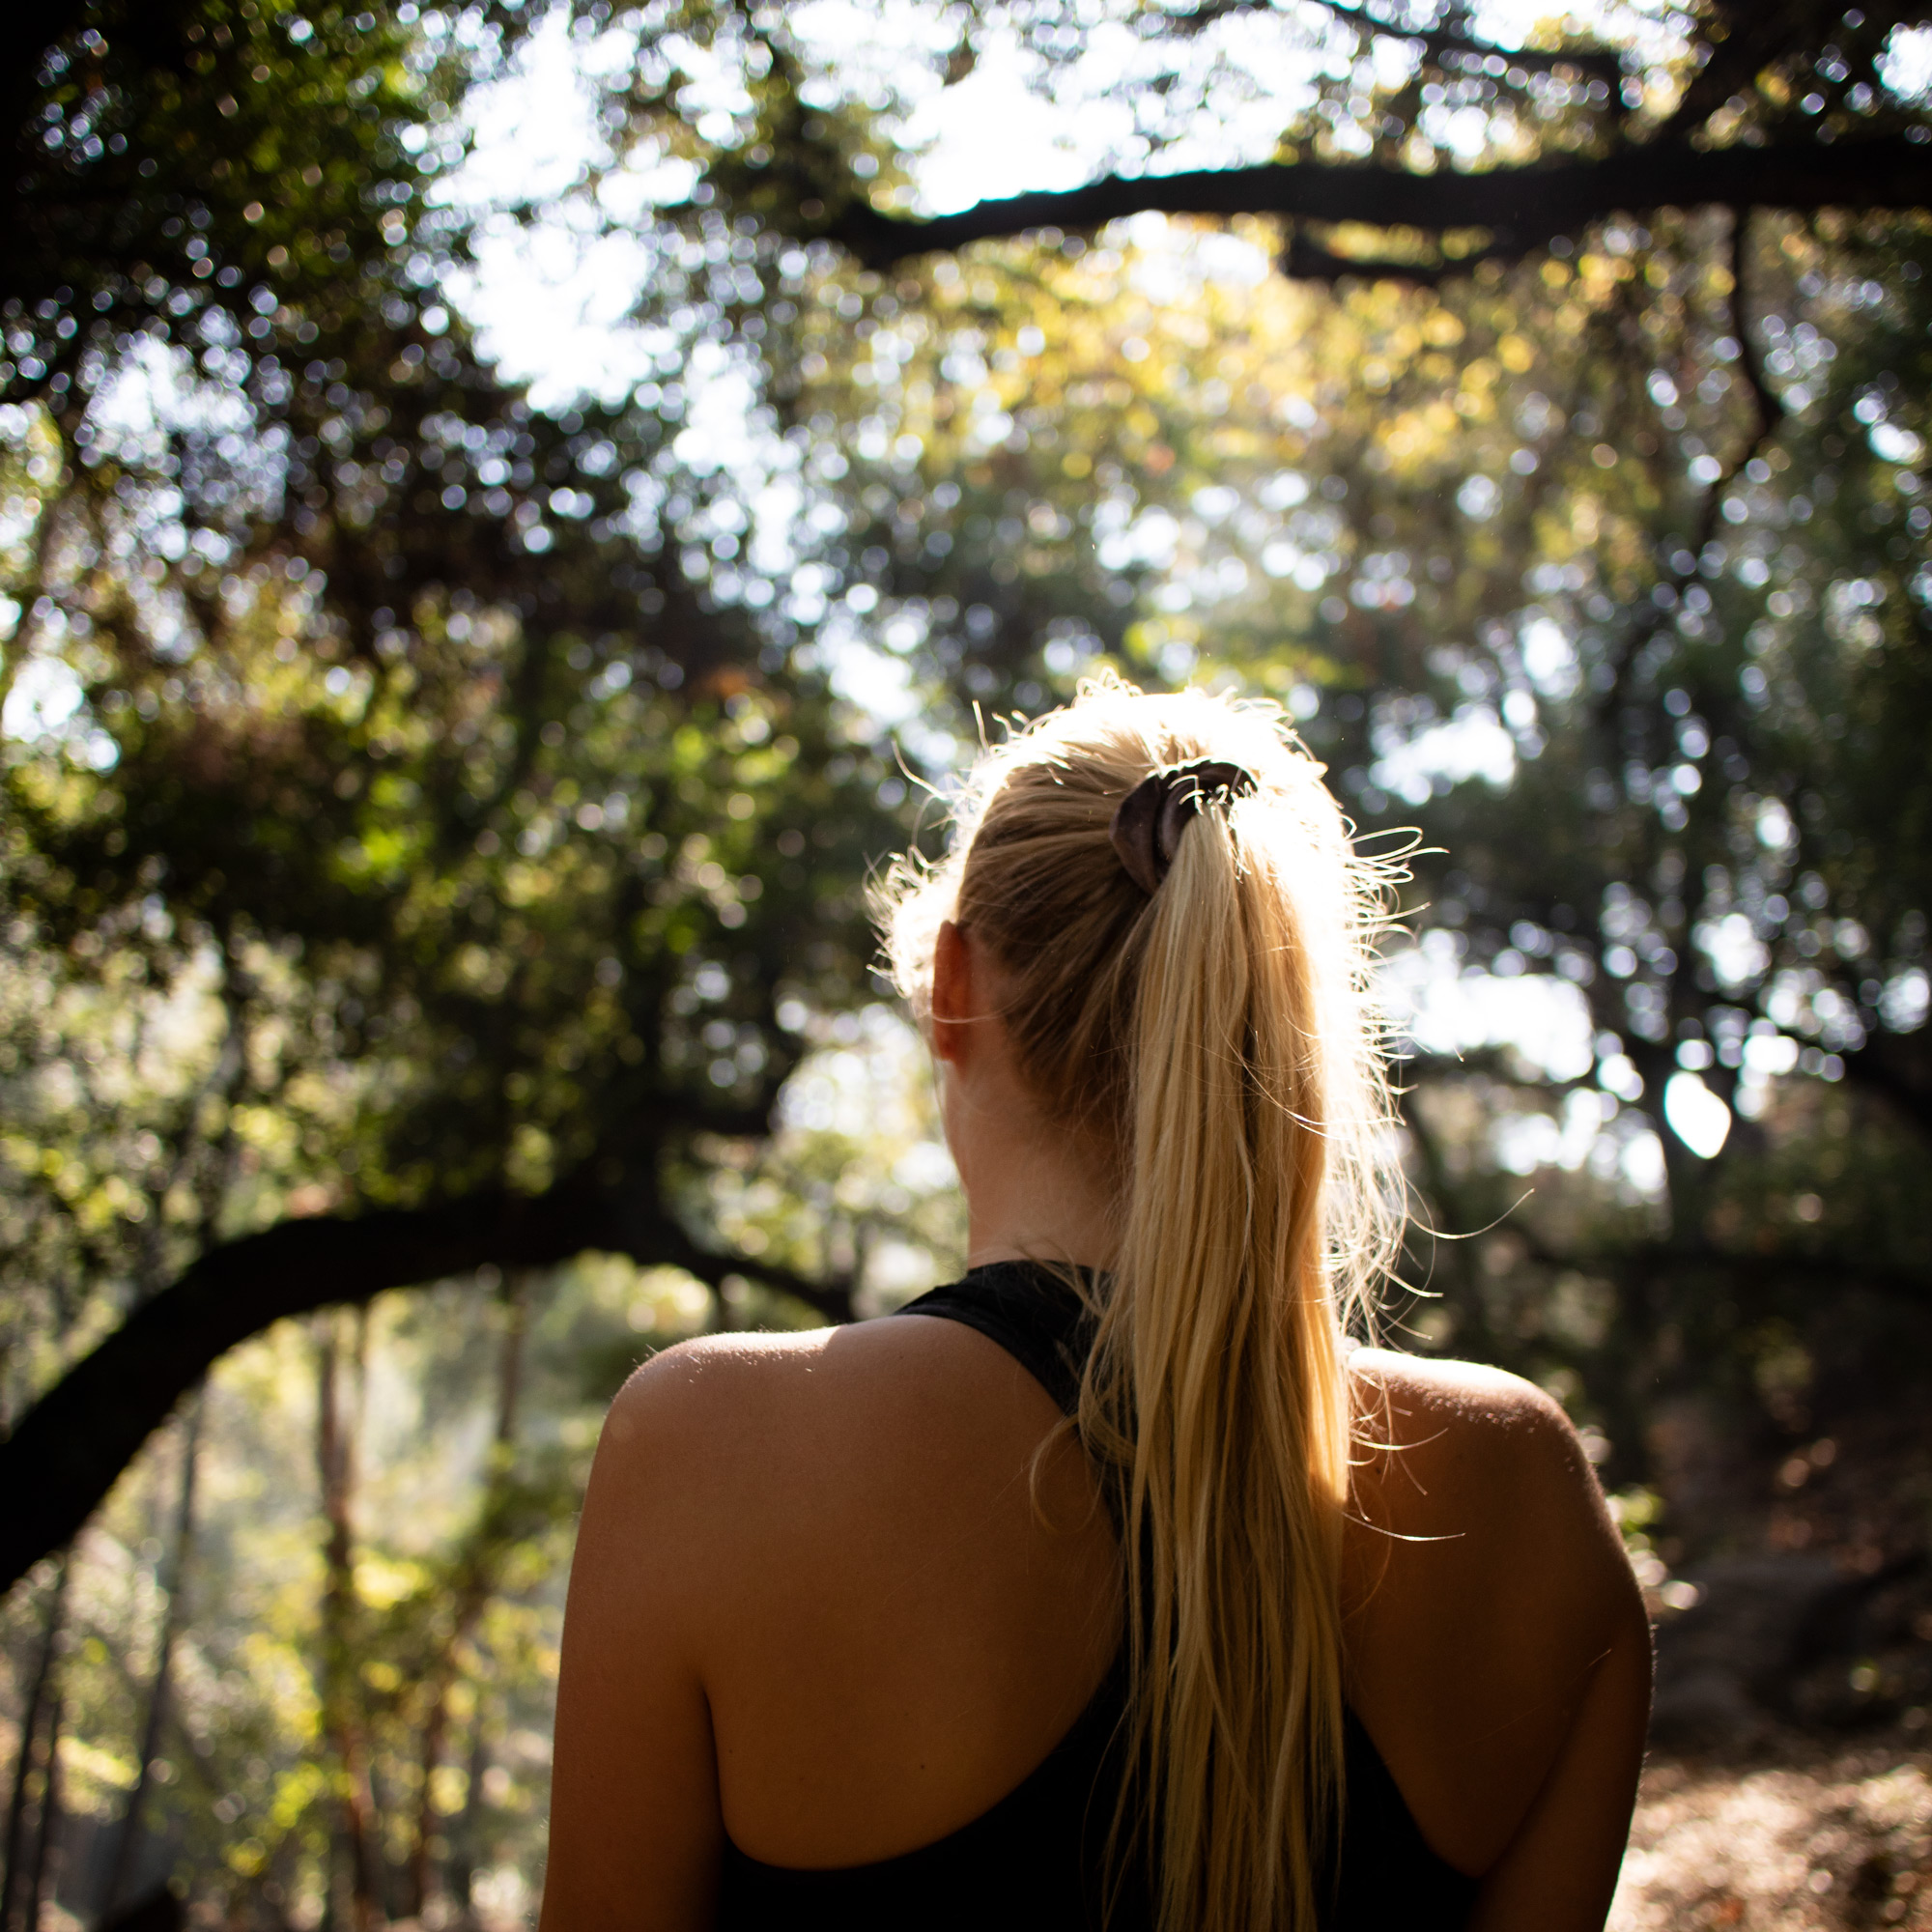 Portrait of a blonde woman from behind with the subject facing away towards the trees.